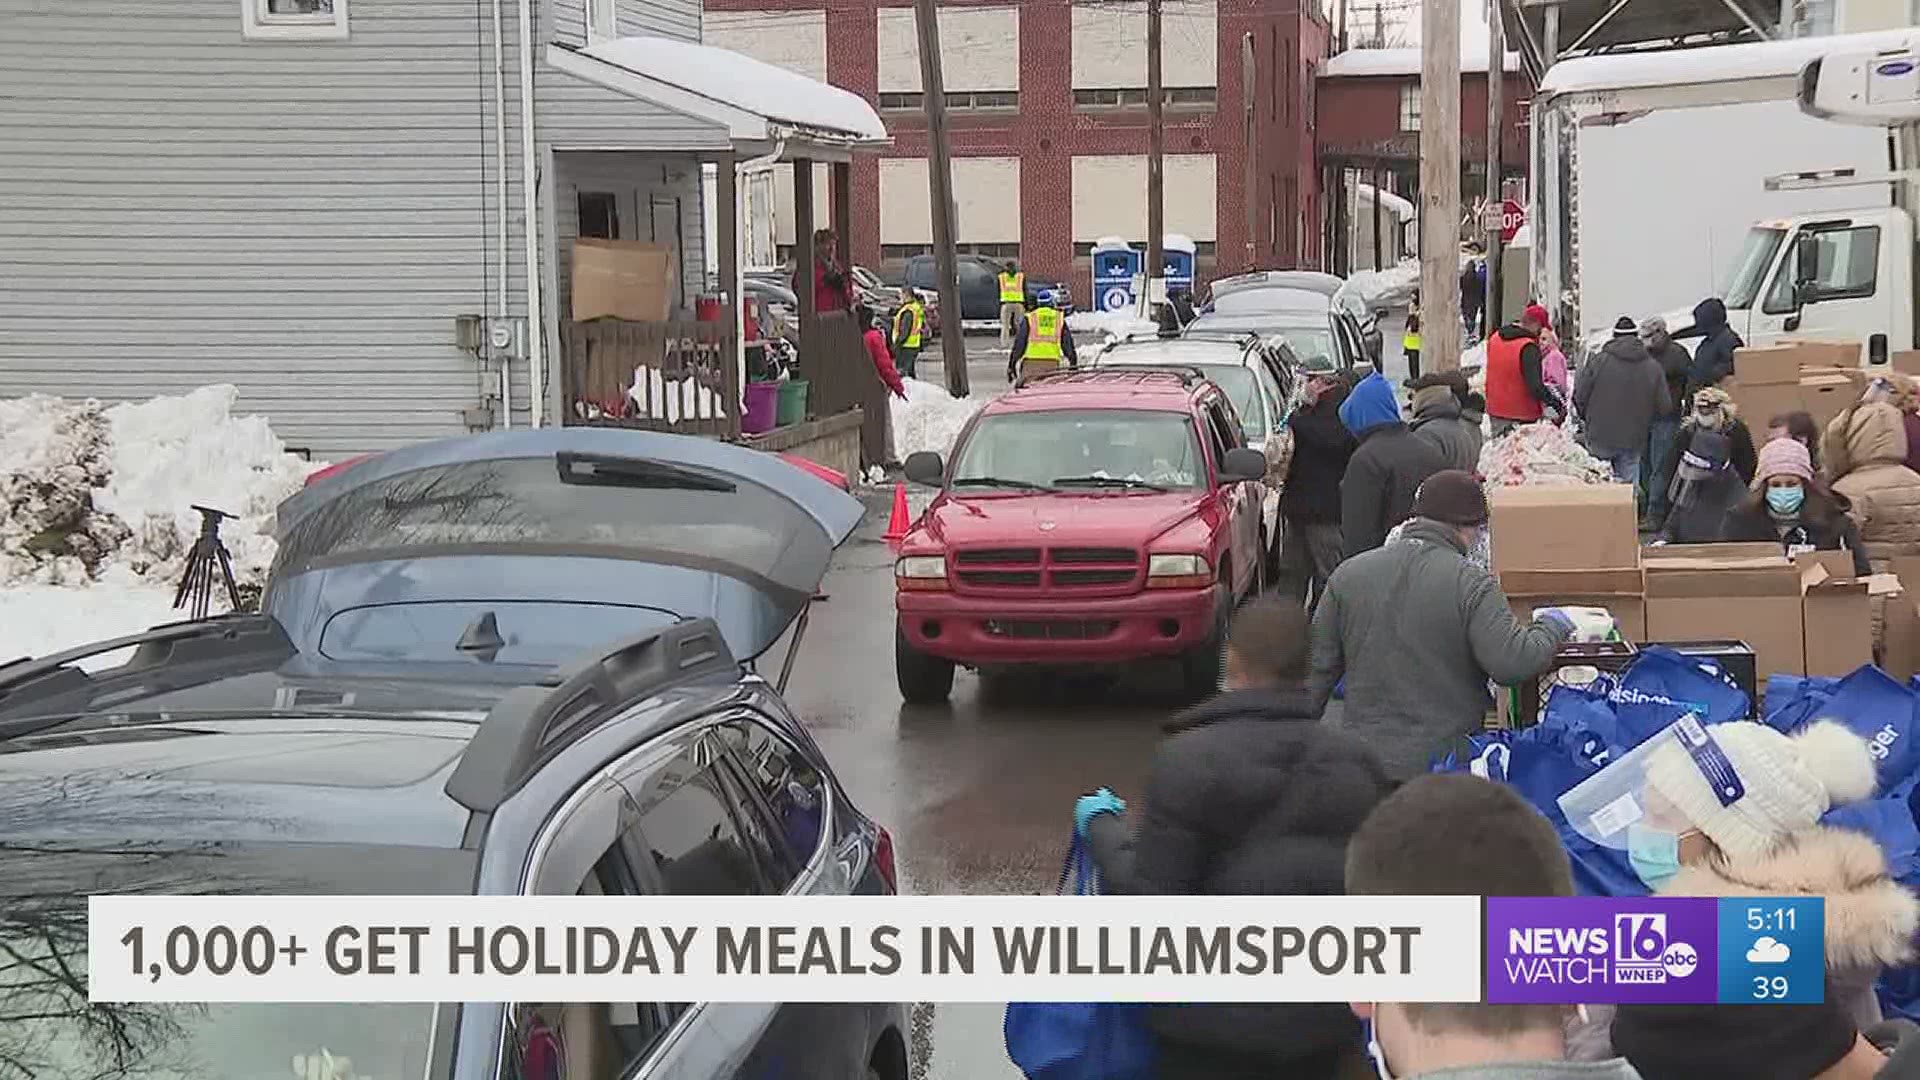 More than 1,000 people were given free holiday meals as the Central Pennsylvania Food Bank teamed up with American Rescue Workers for a big holiday food drive.